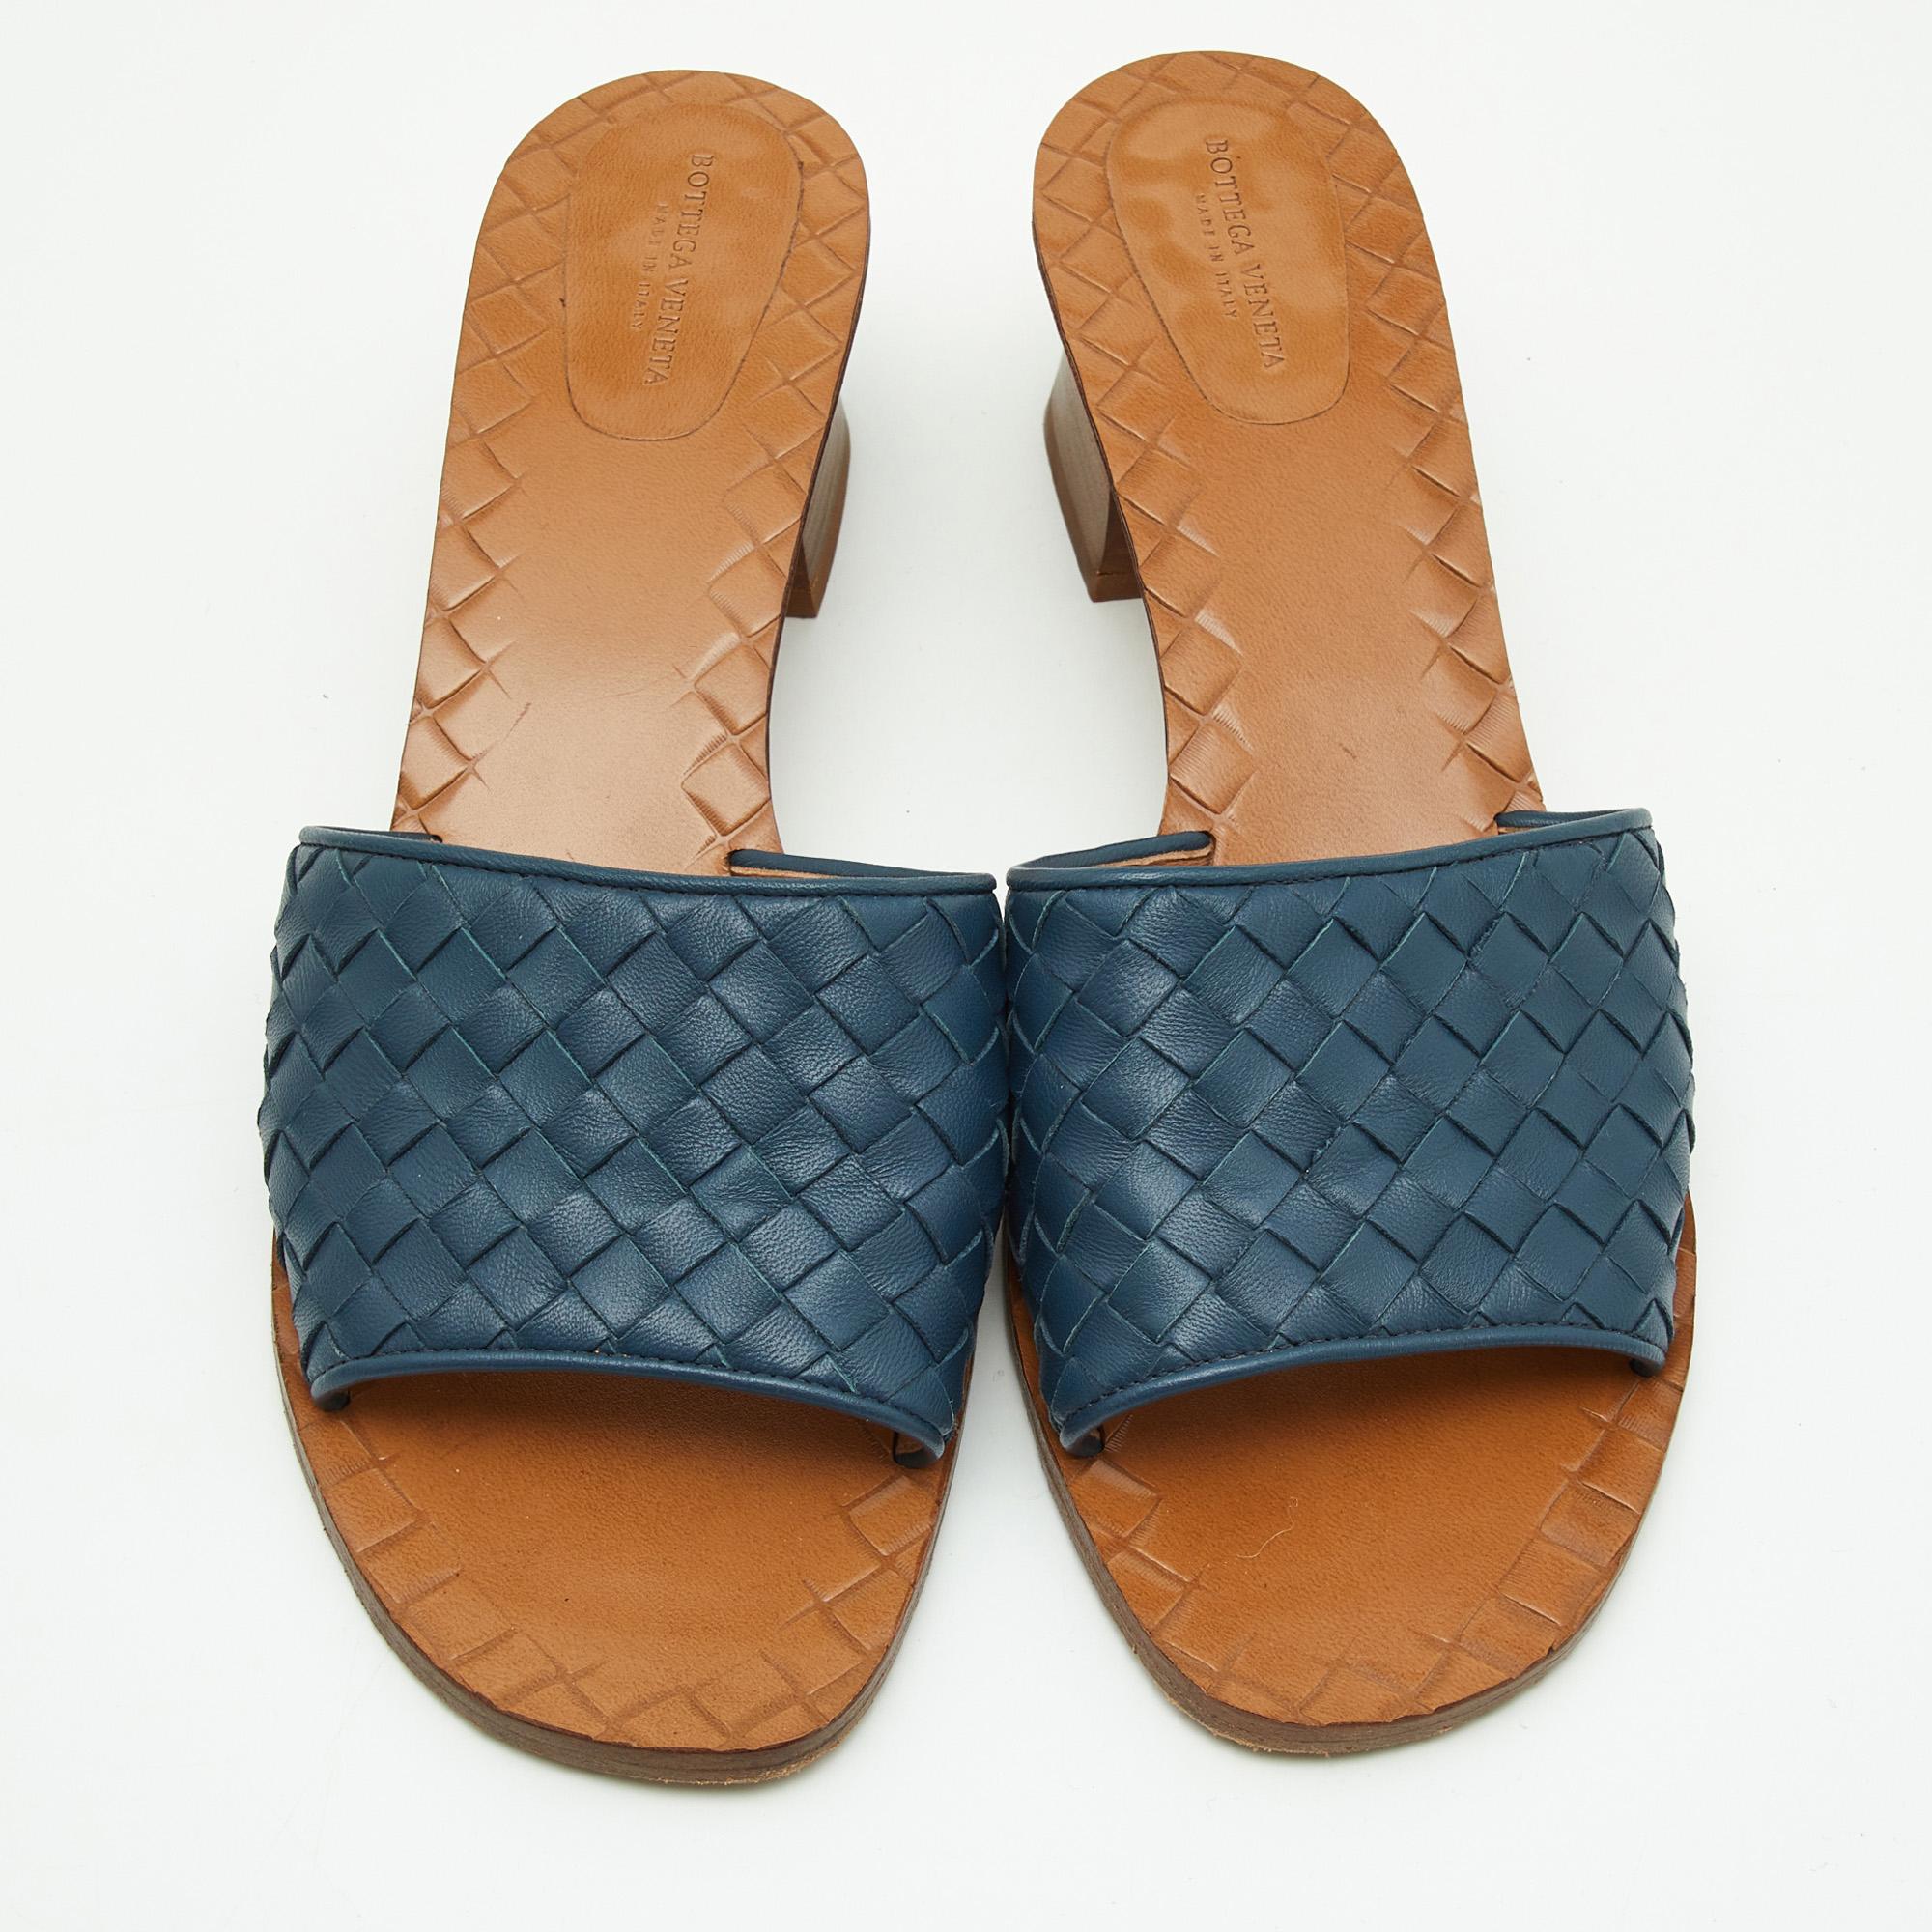 Enhance your casual looks with a touch of high style with these Bottega Veneta slides. Rendered in quality material with a lovely hue adorning its expanse, this pair is a must-have!

